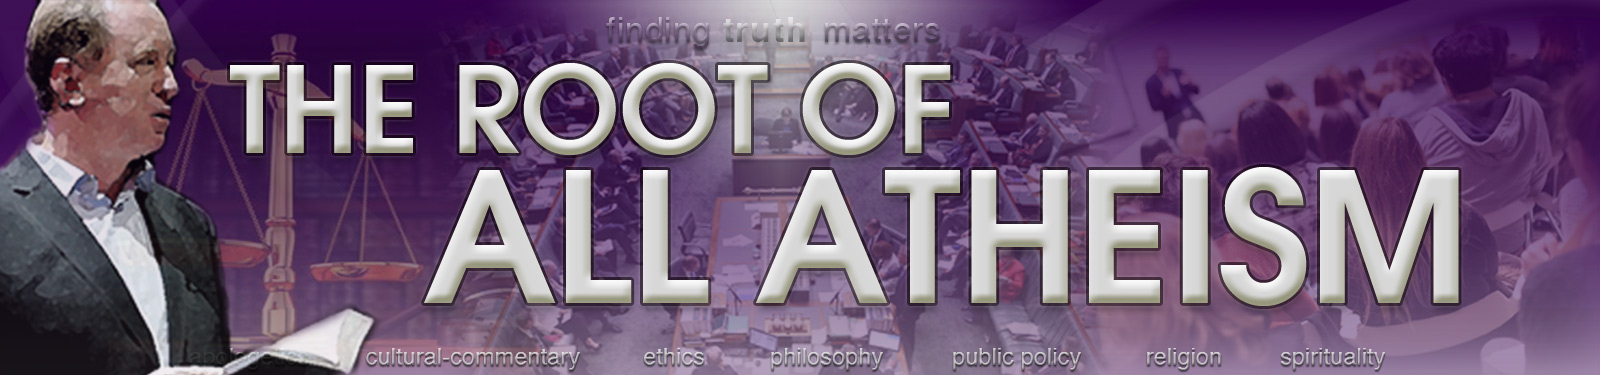 The Root of All Atheism | finding truth matters